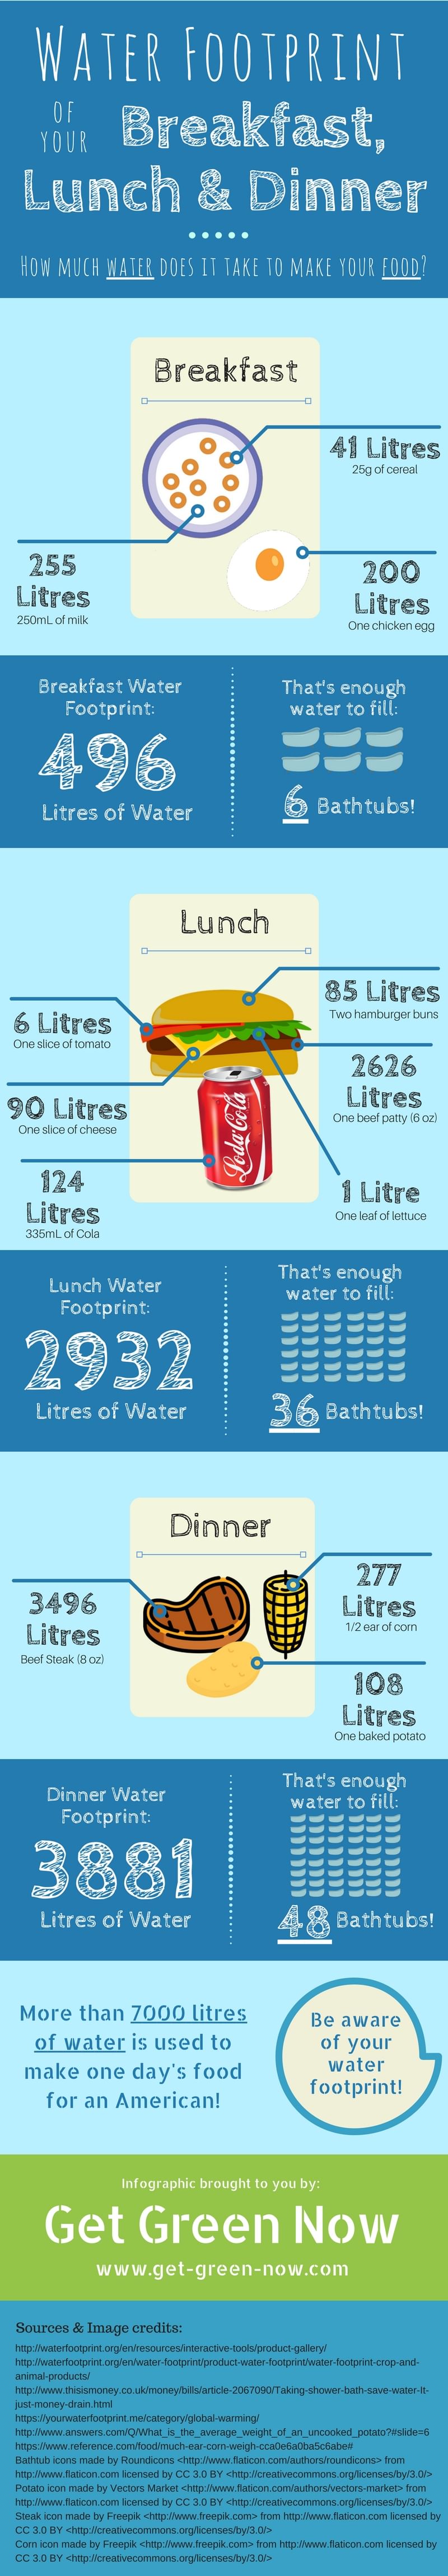 Water-footprint-of-food-infographic